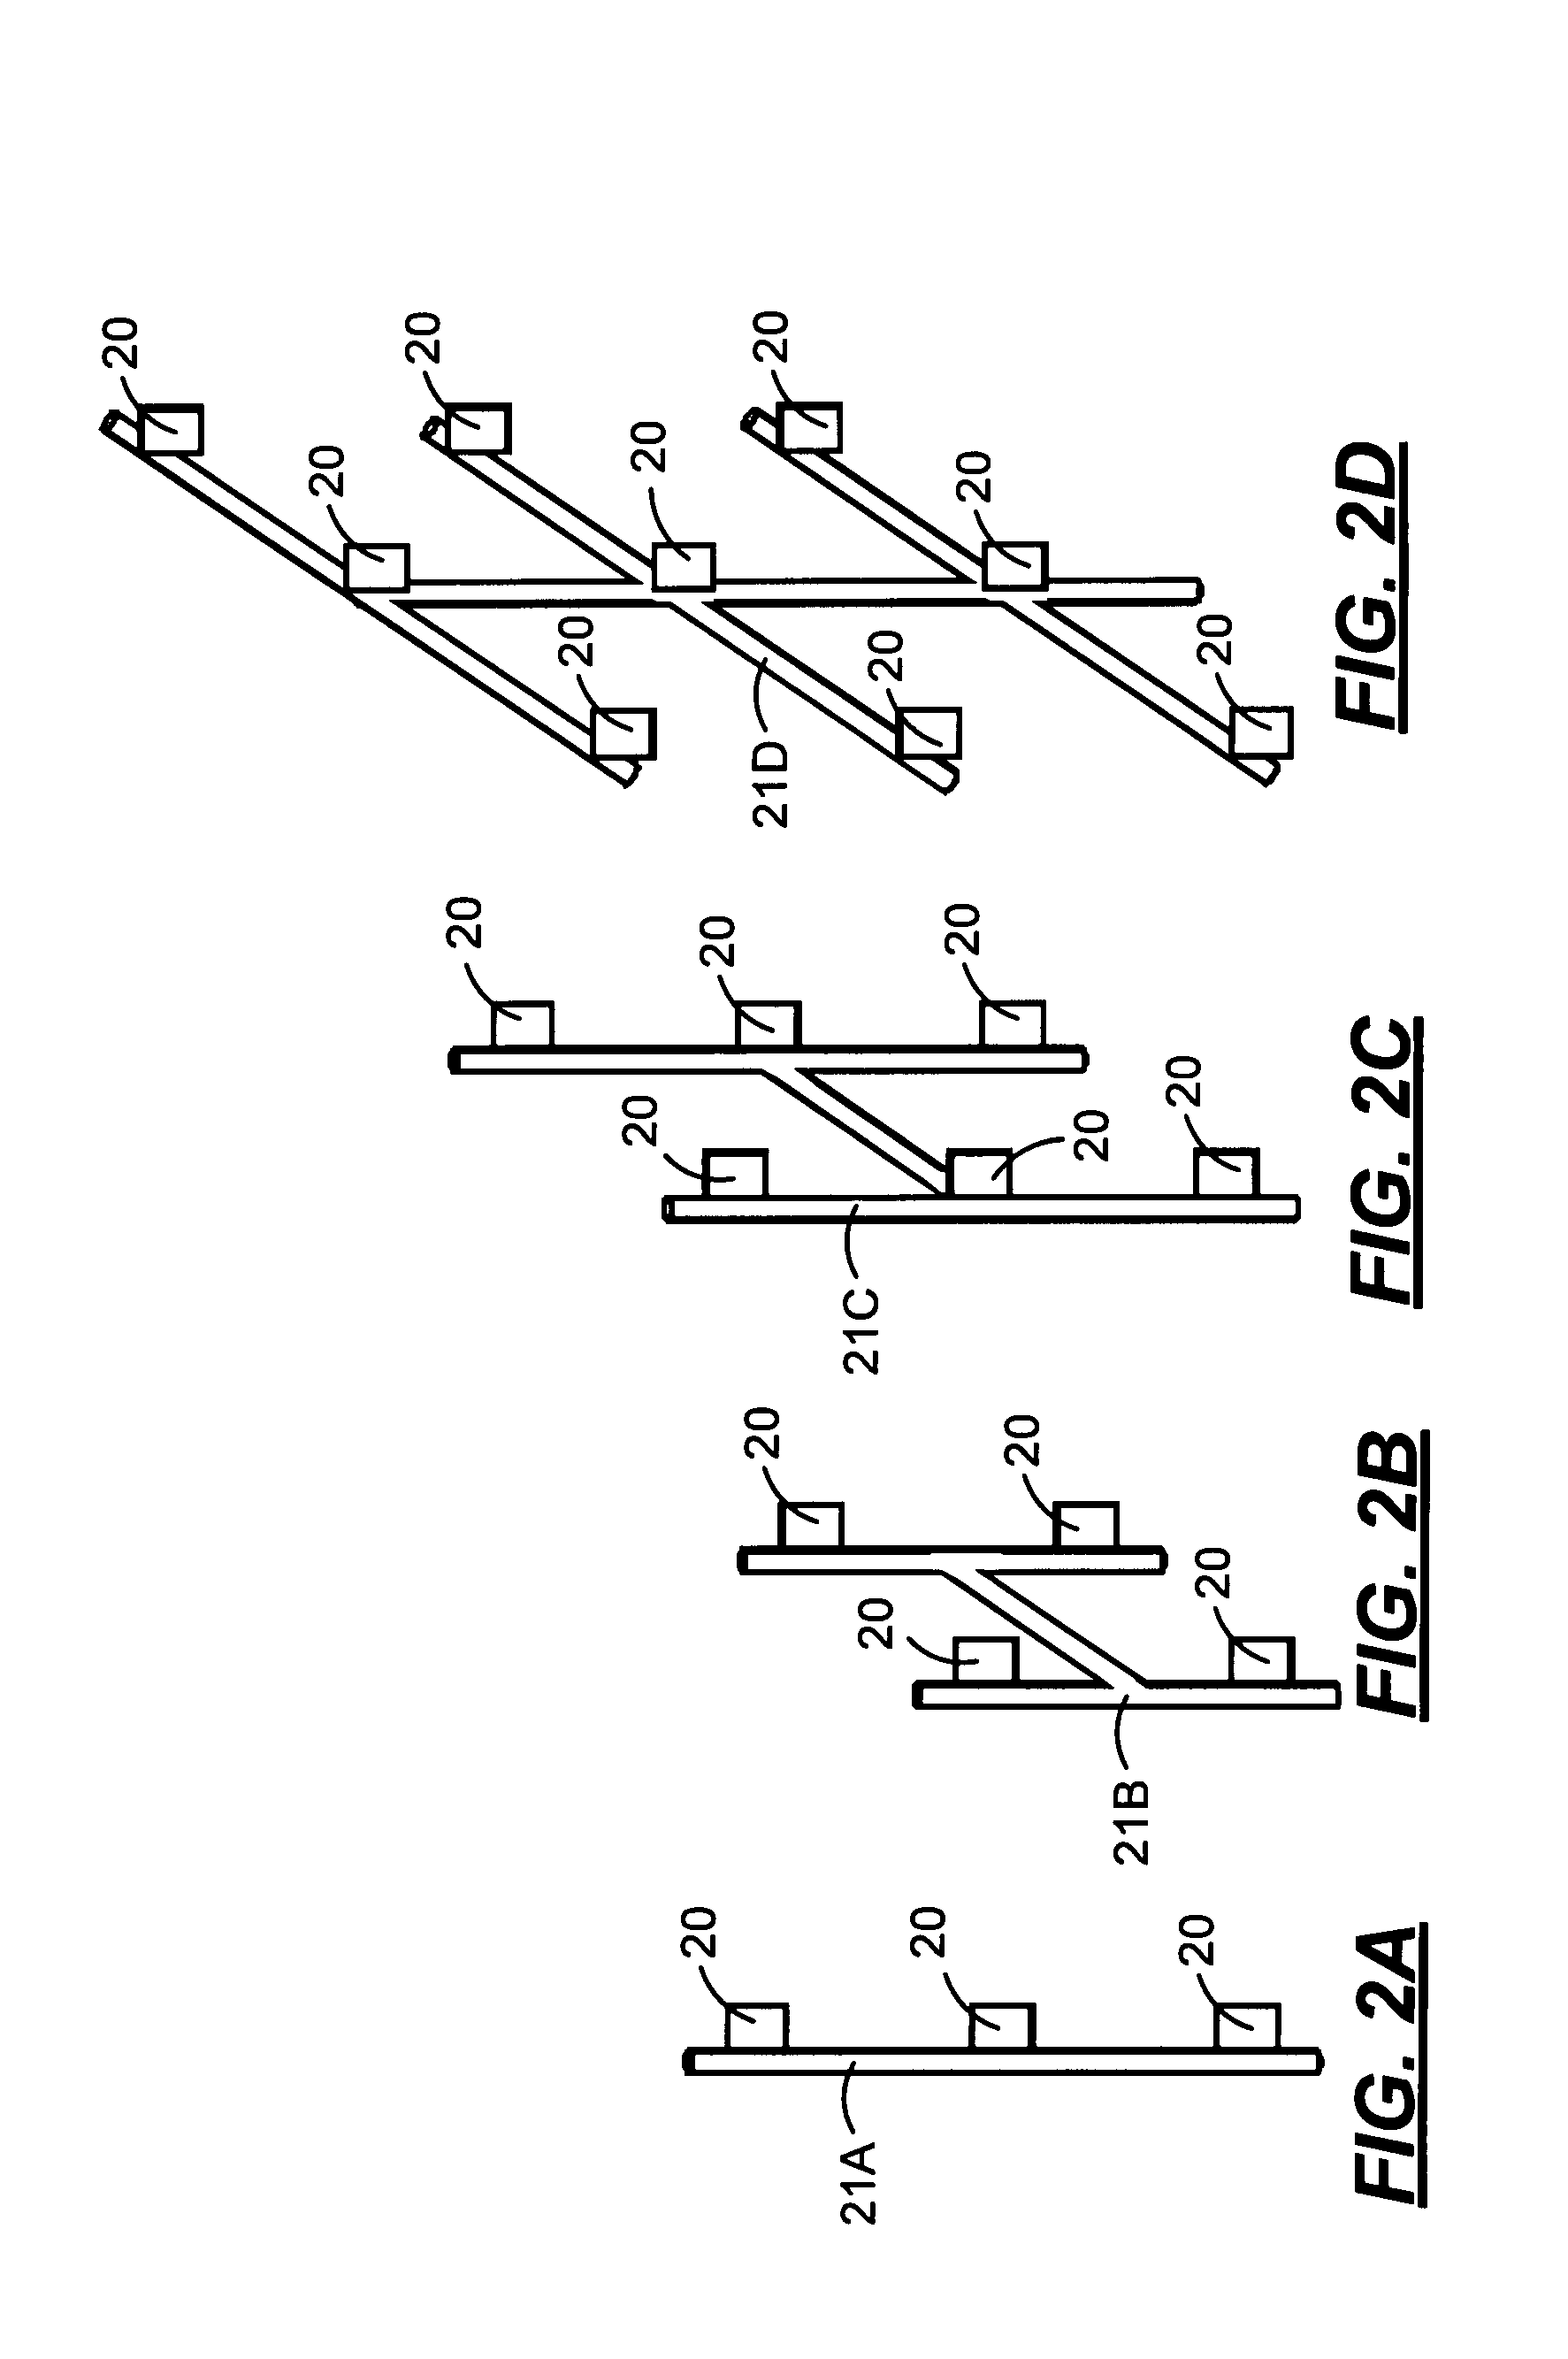 Method and apparatus for skin documentation and analysis